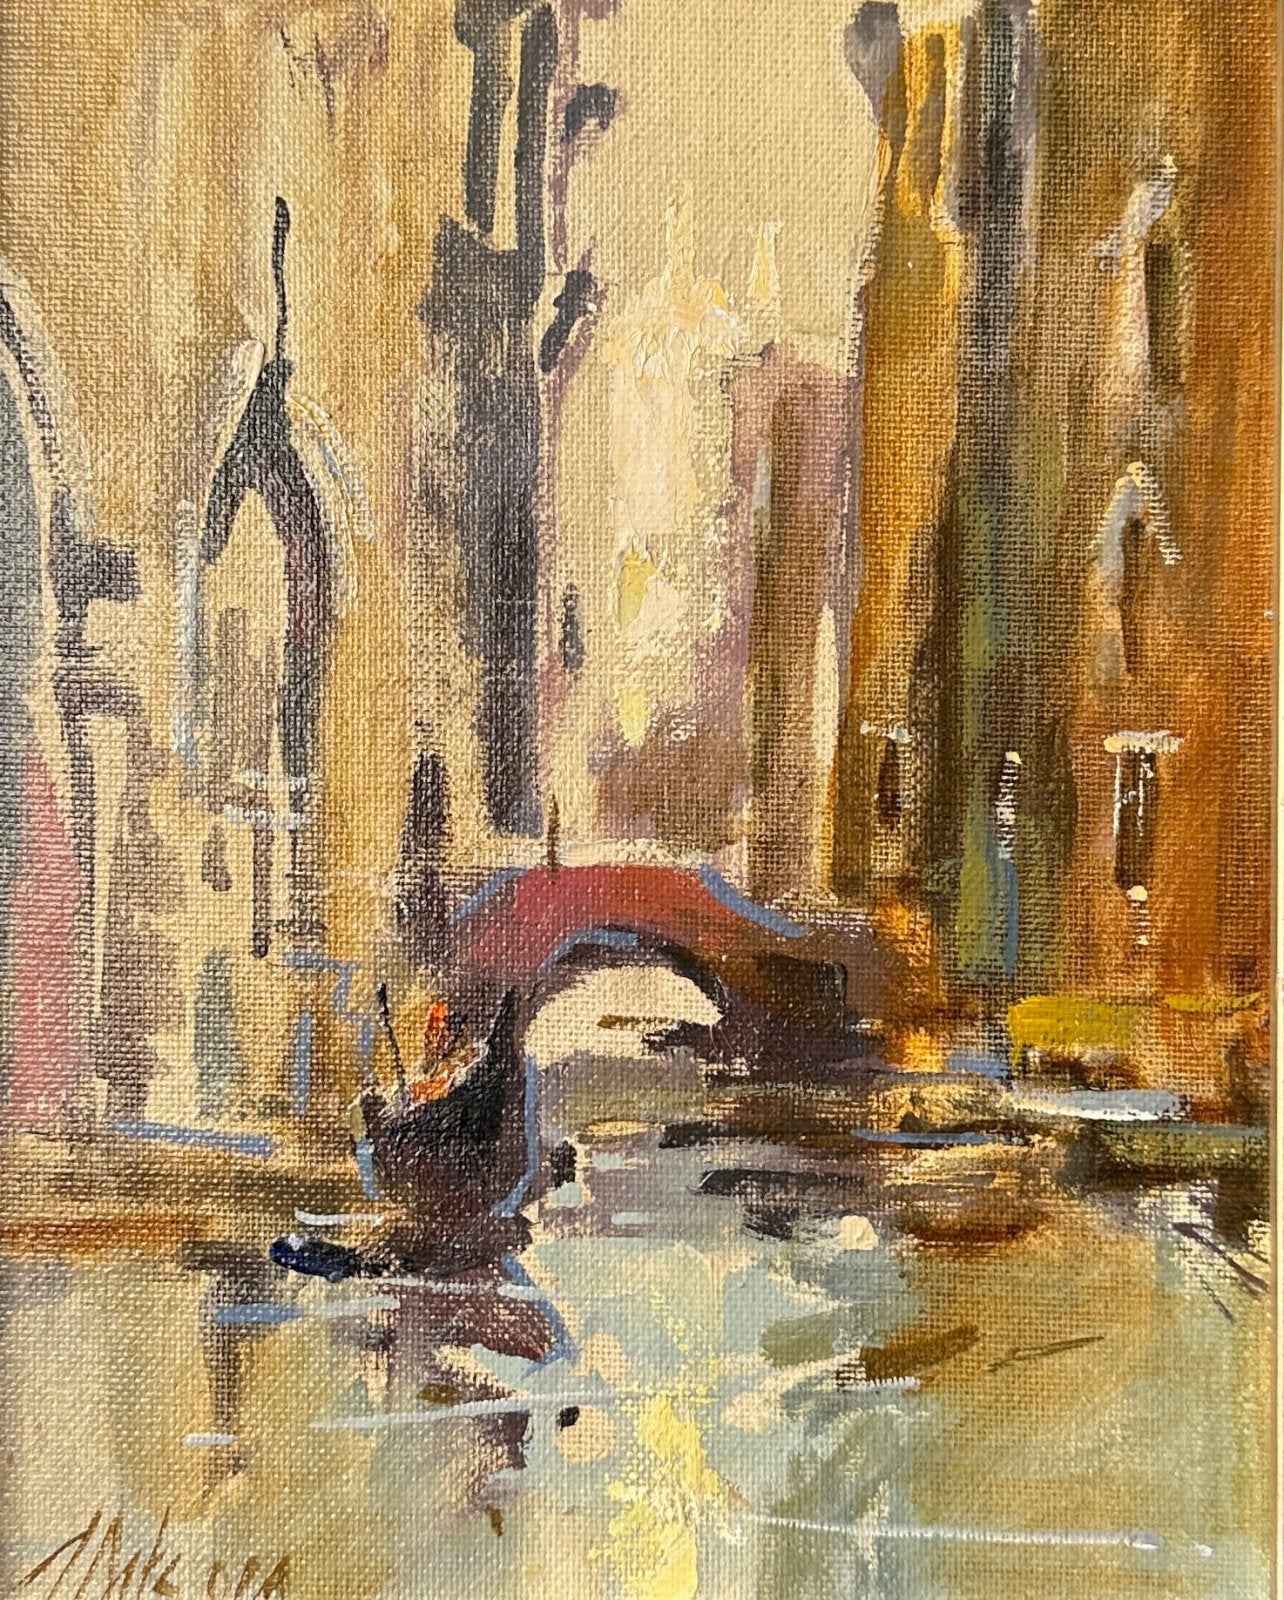 Venice Fall by George Pate at LePrince Galleries